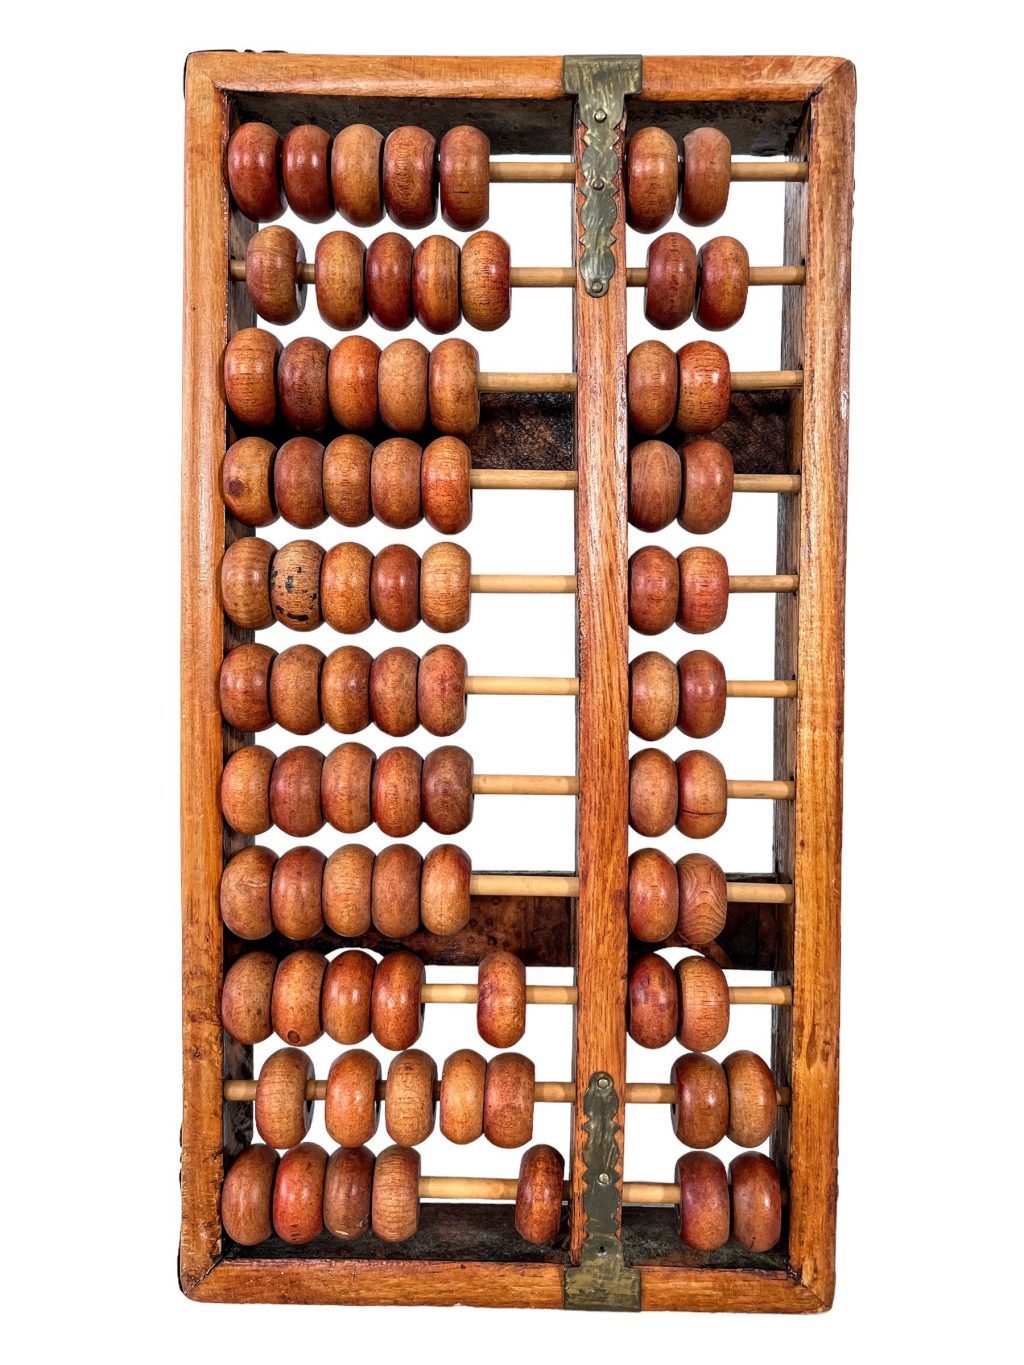 Vintage Chinese Abacus Counting Instrument Calculator Decorative Ornament Display China c1970-80’s